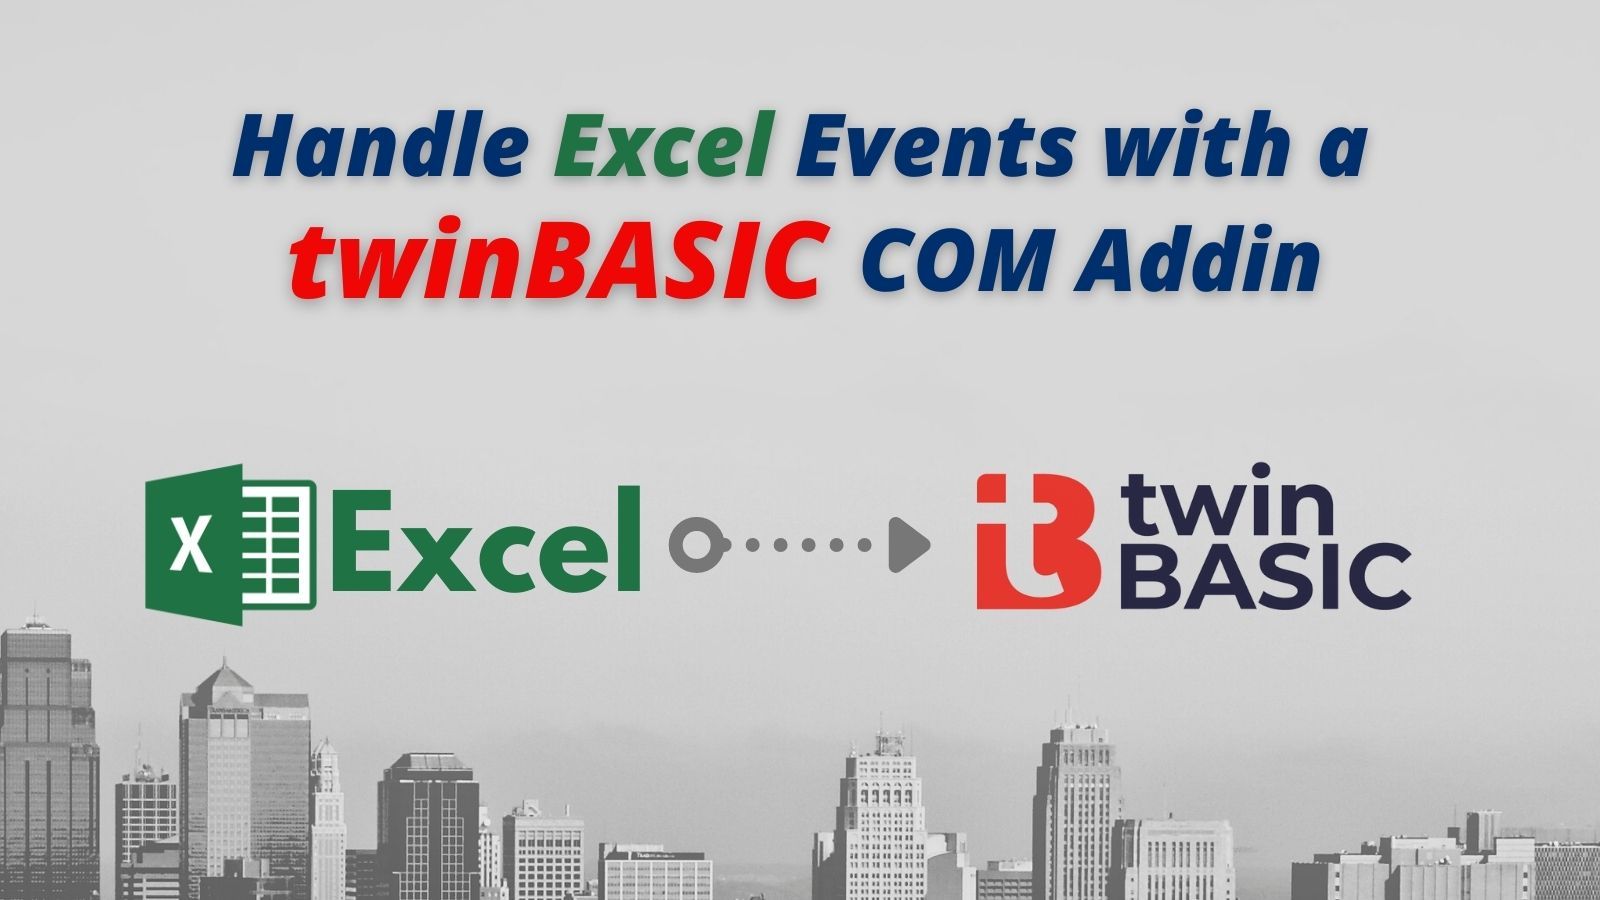 HOW TO: Handle Excel Events in a twinBASIC COM Addin